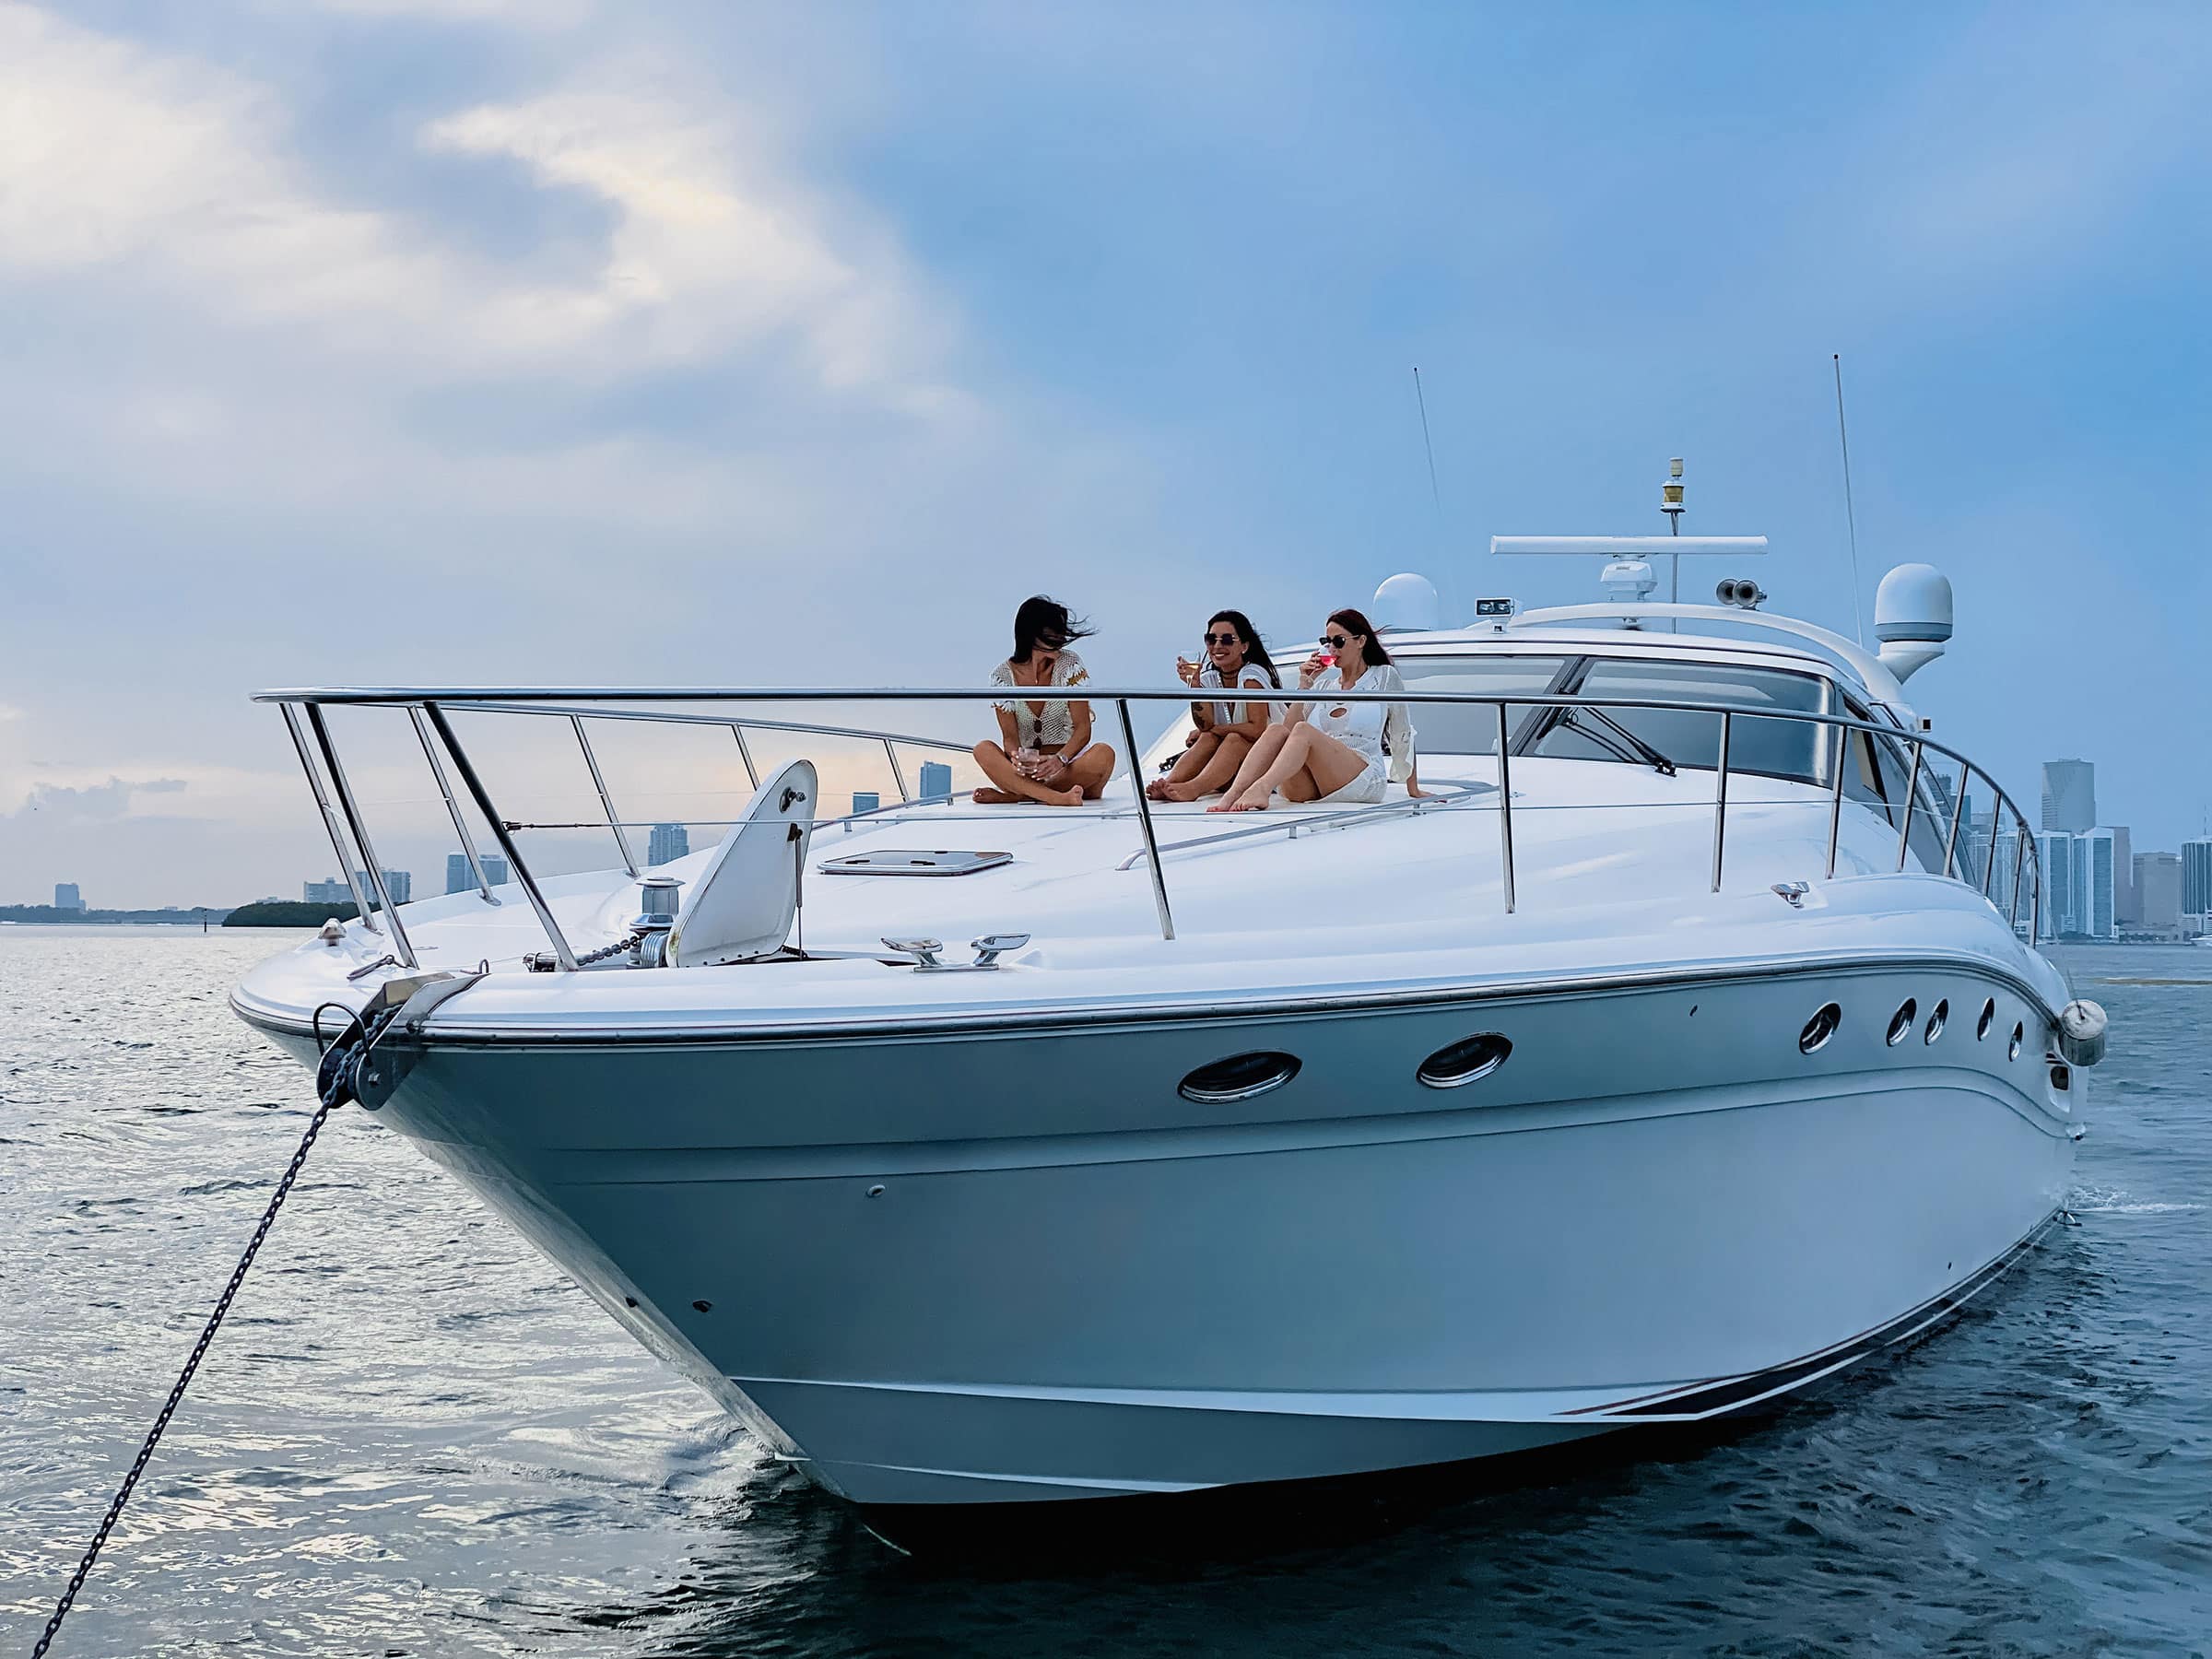 https://theadvantaged.com/wp-content/uploads/2022/05/iP-35-Sea-Ray-70-Yacht-for-Rent.jpeg